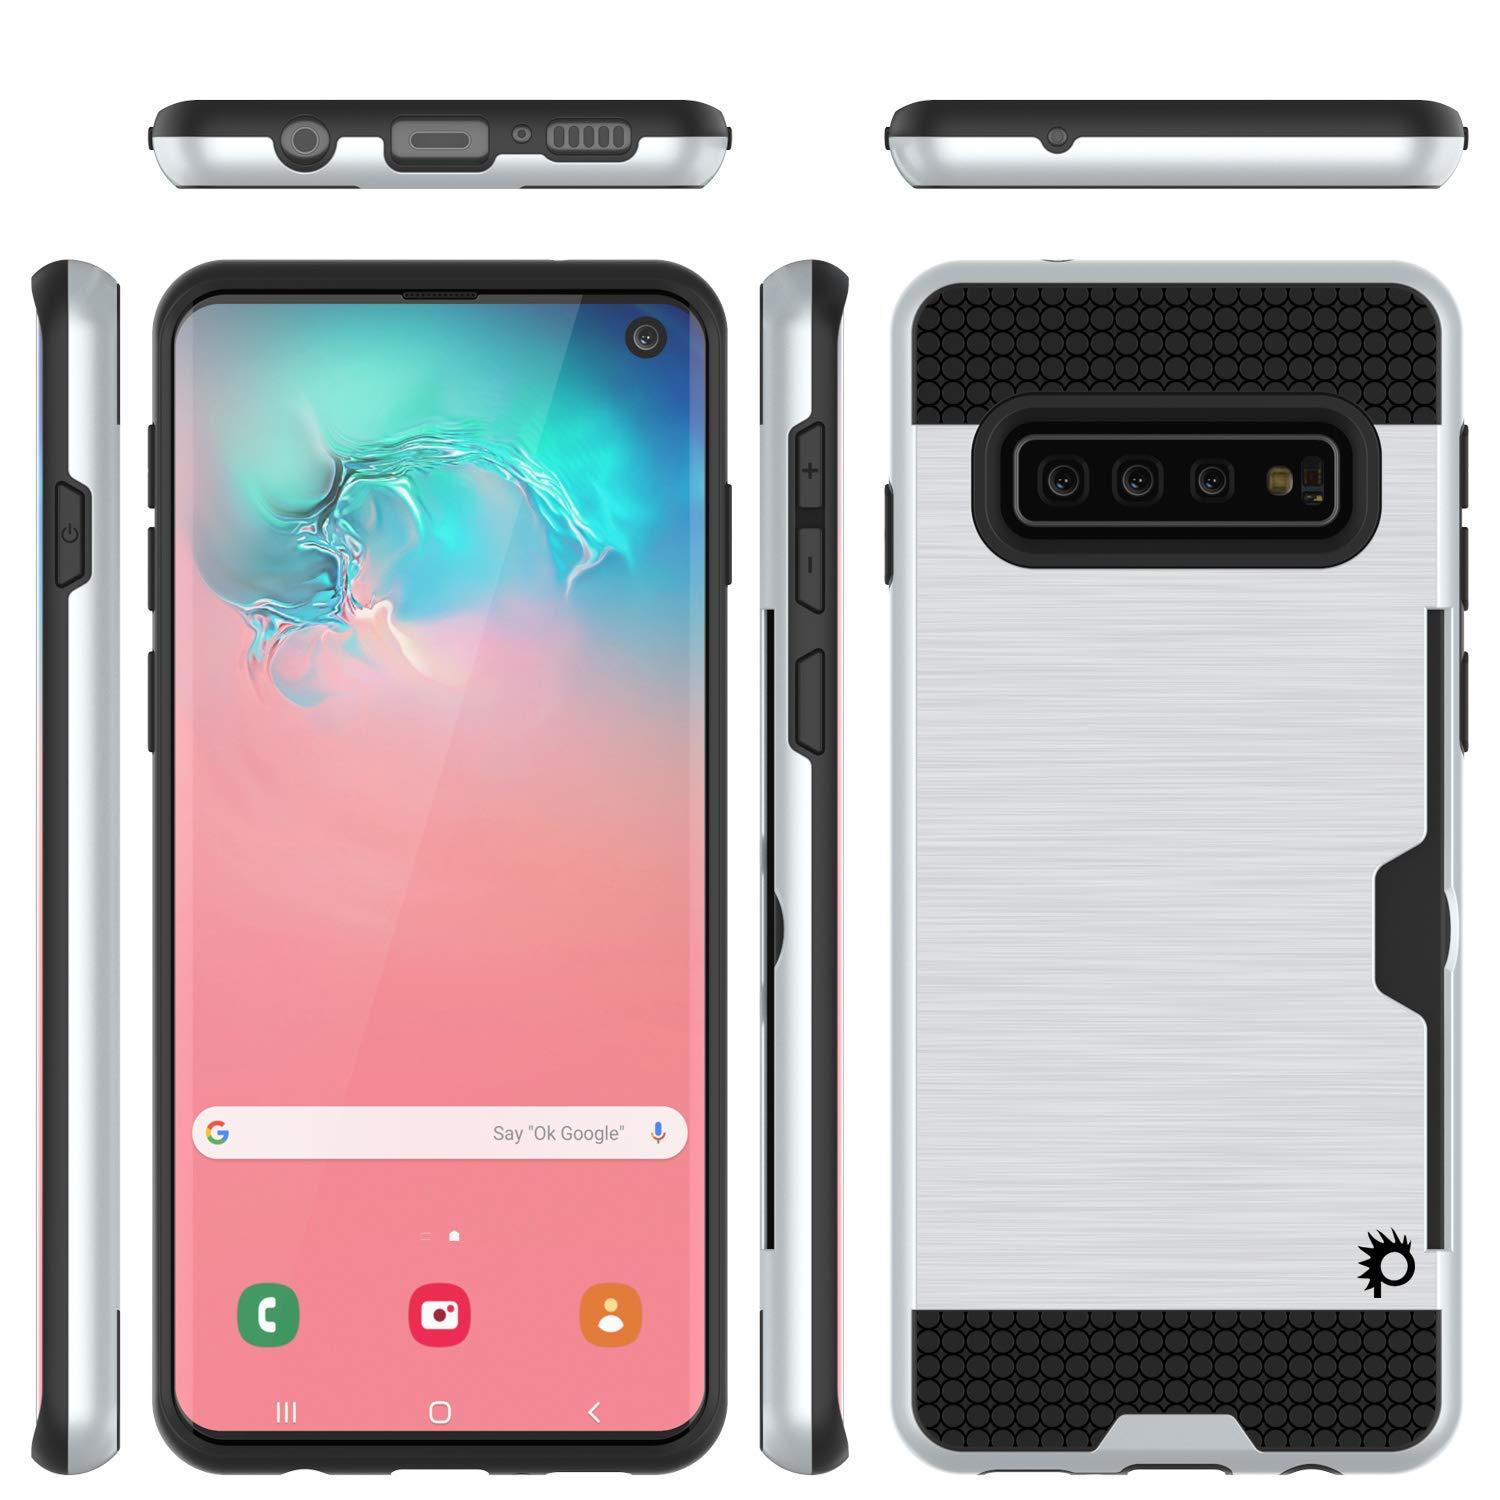 Galaxy S10 Case, PUNKcase [SLOT Series] [Slim Fit] Dual-Layer Armor Cover w/Integrated Anti-Shock System, Credit Card Slot [White]